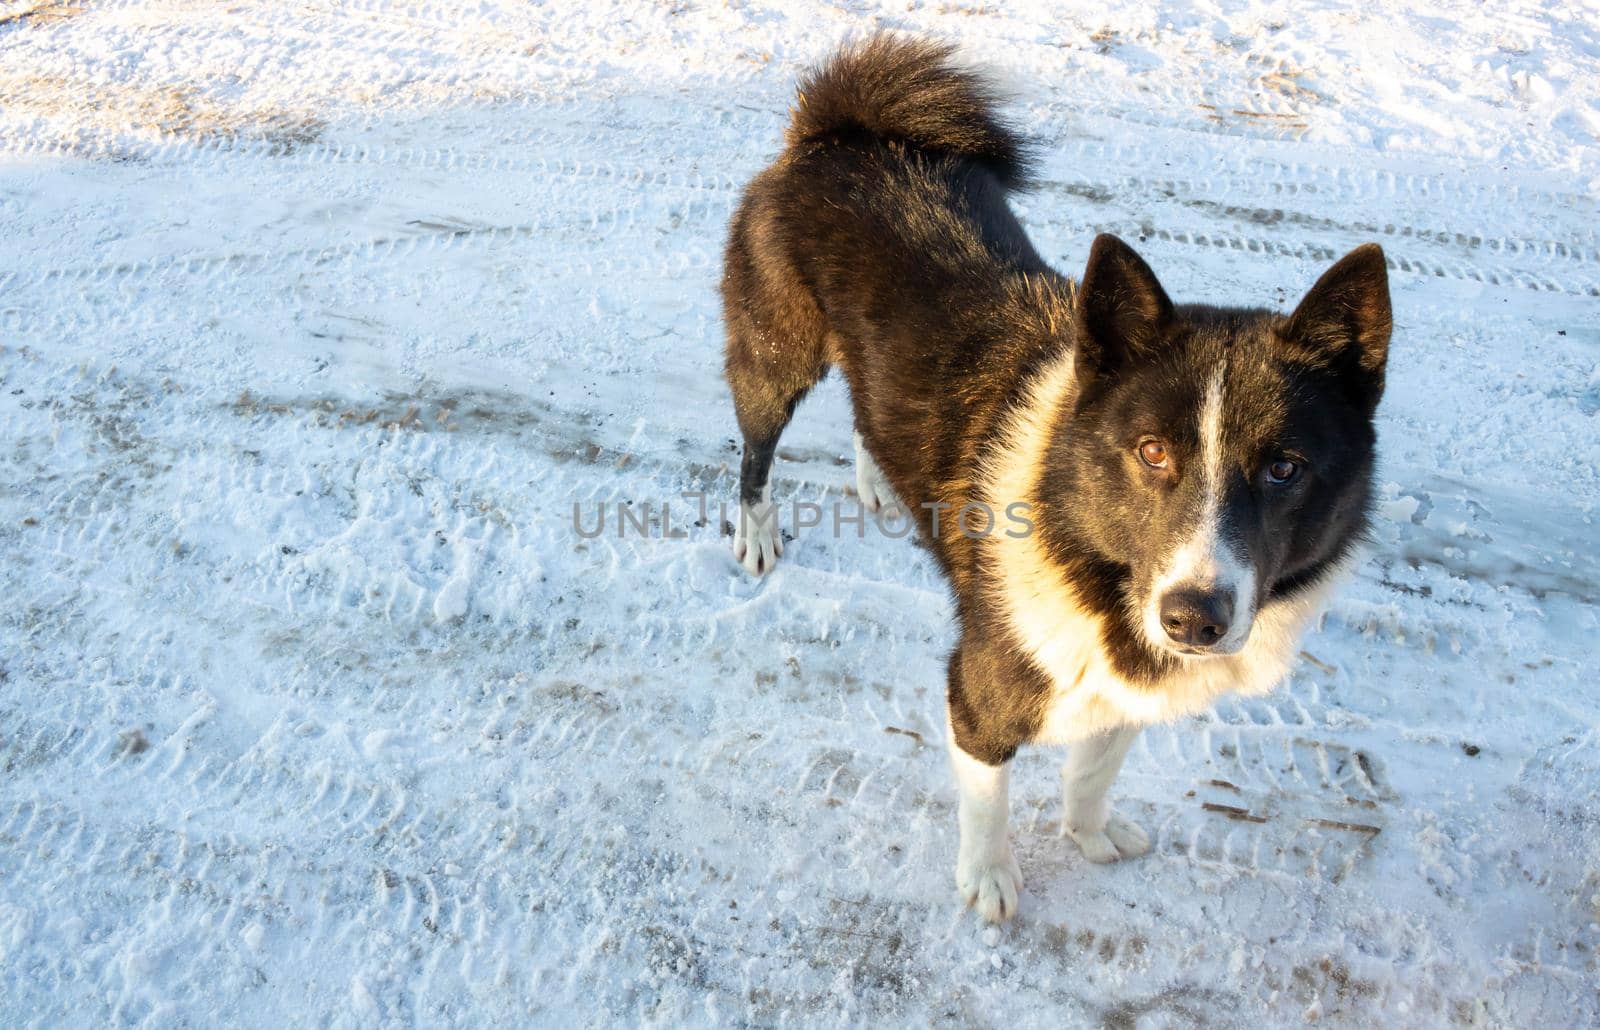 A dog stands on a snowy road and looks at the camera by lapushka62